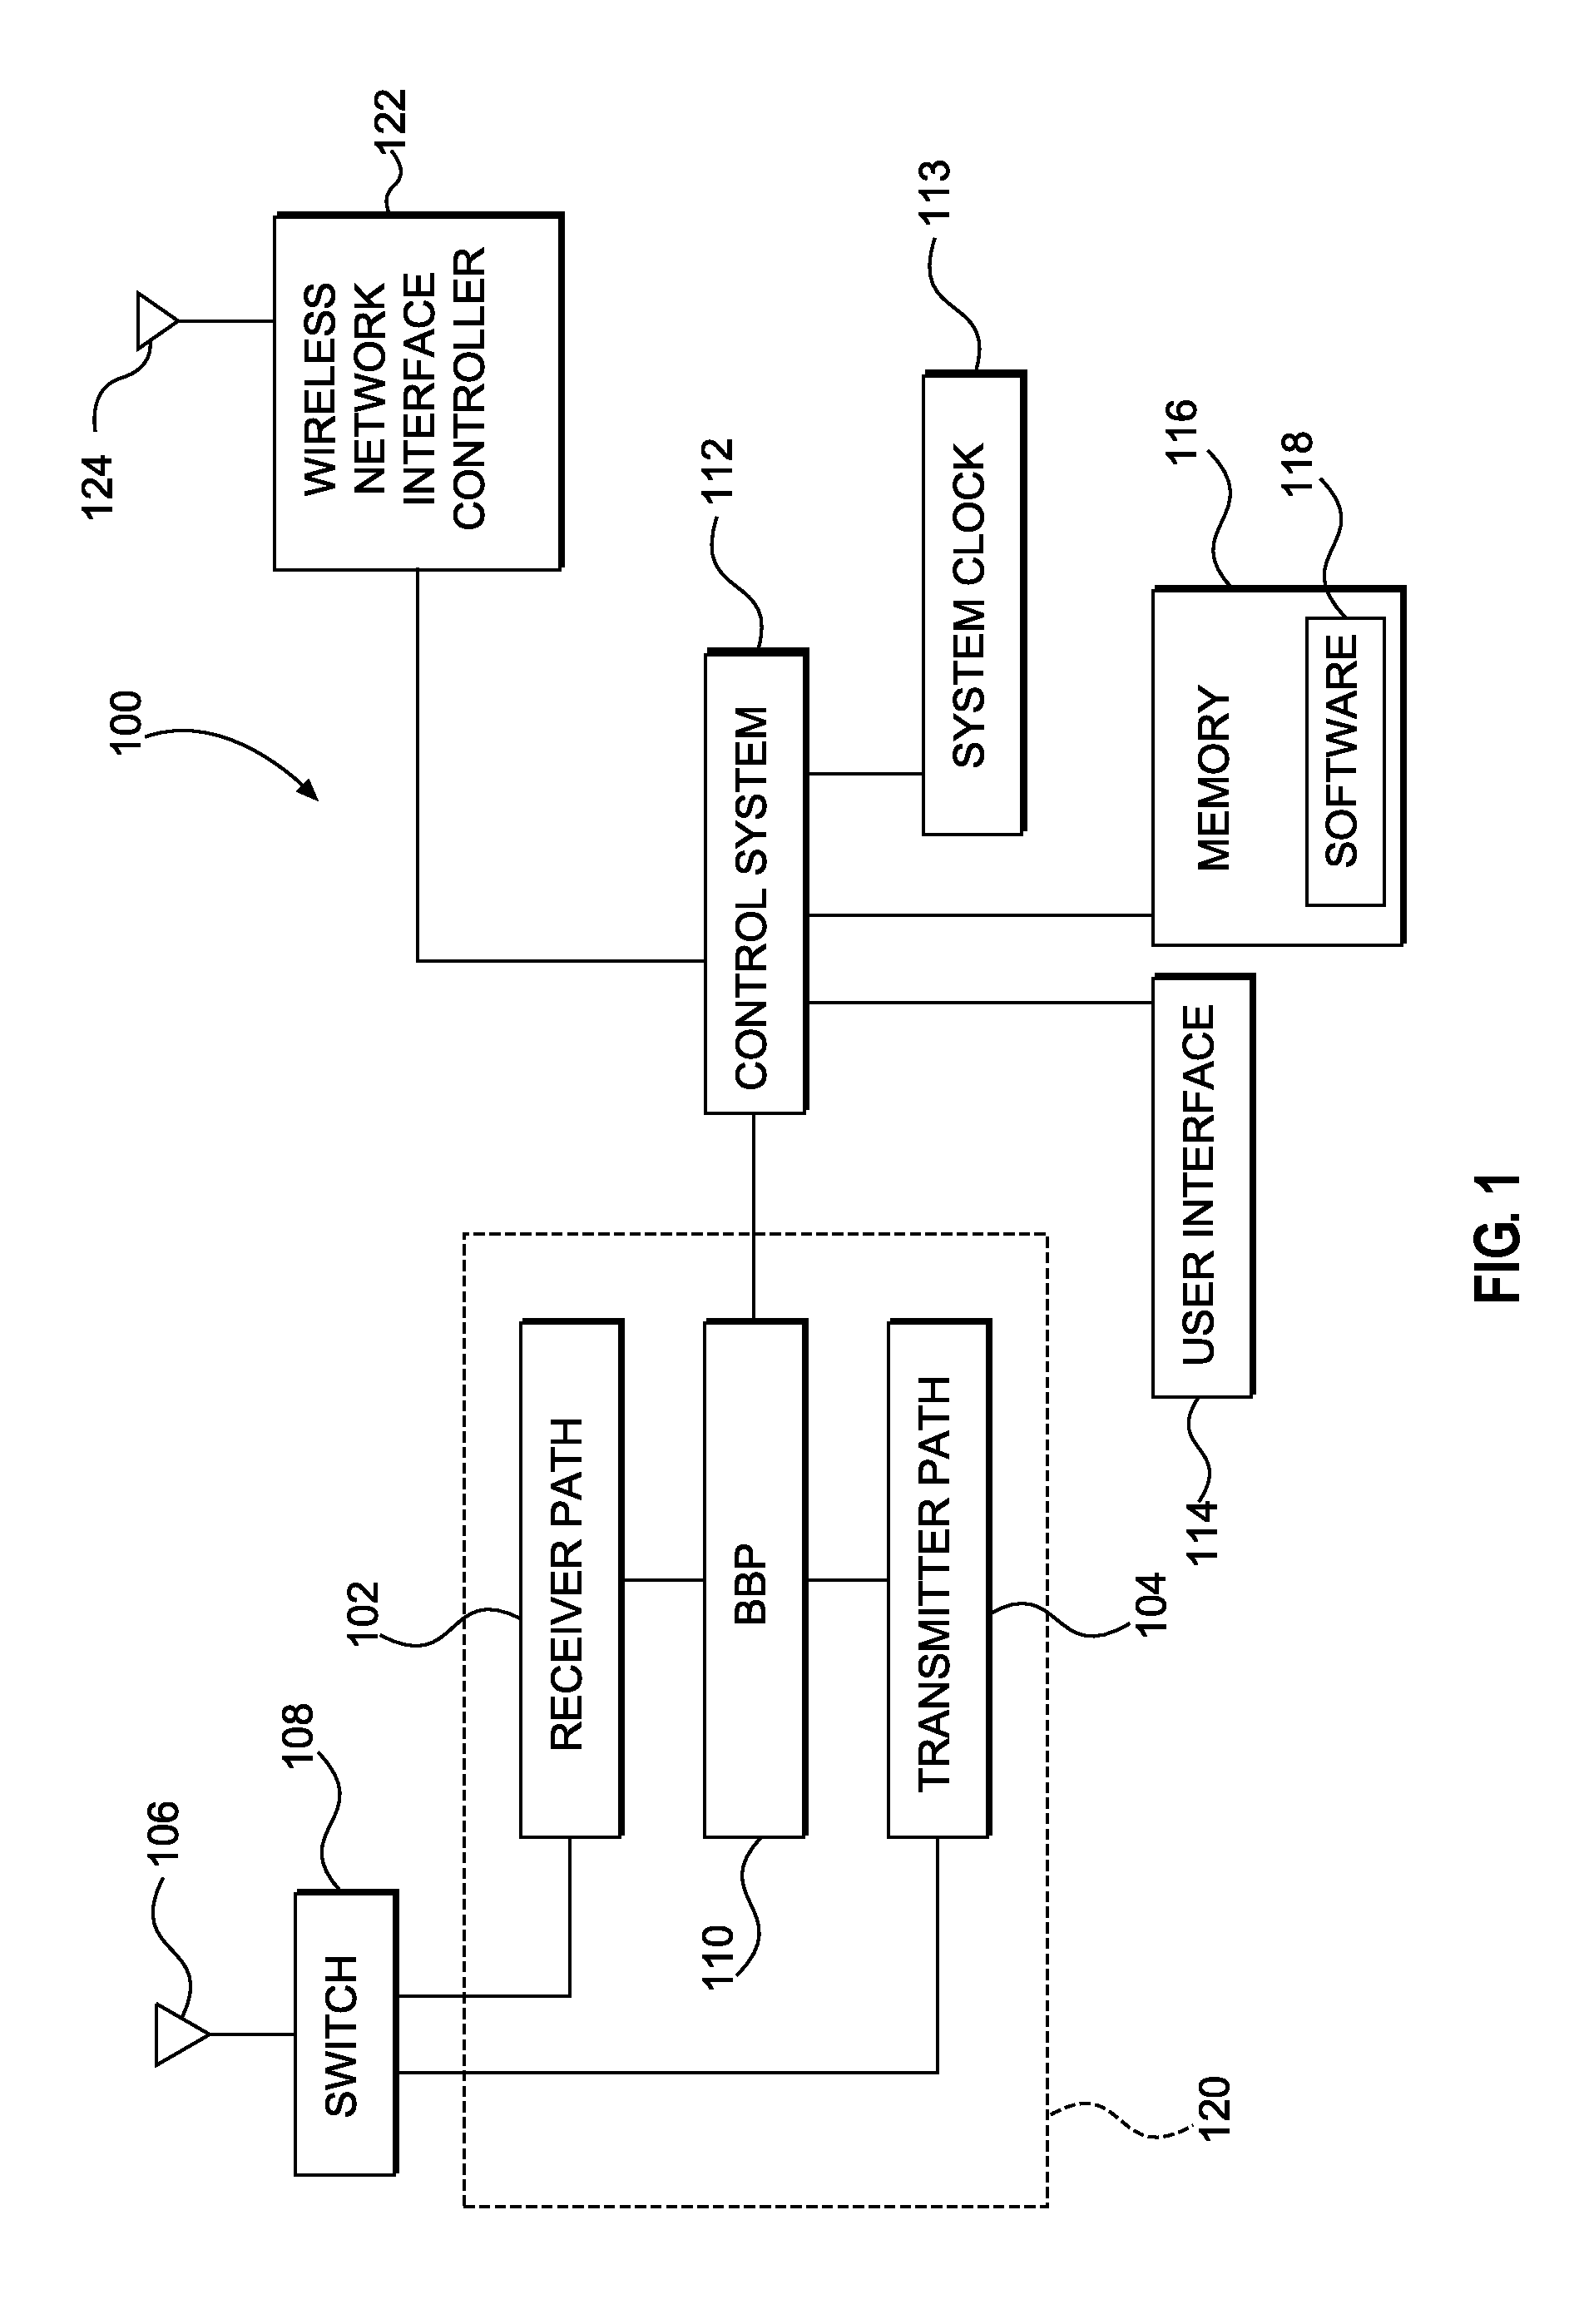 Apparatuses and methods for wireless synchronization of multiple multimedia devices using a common timing framework